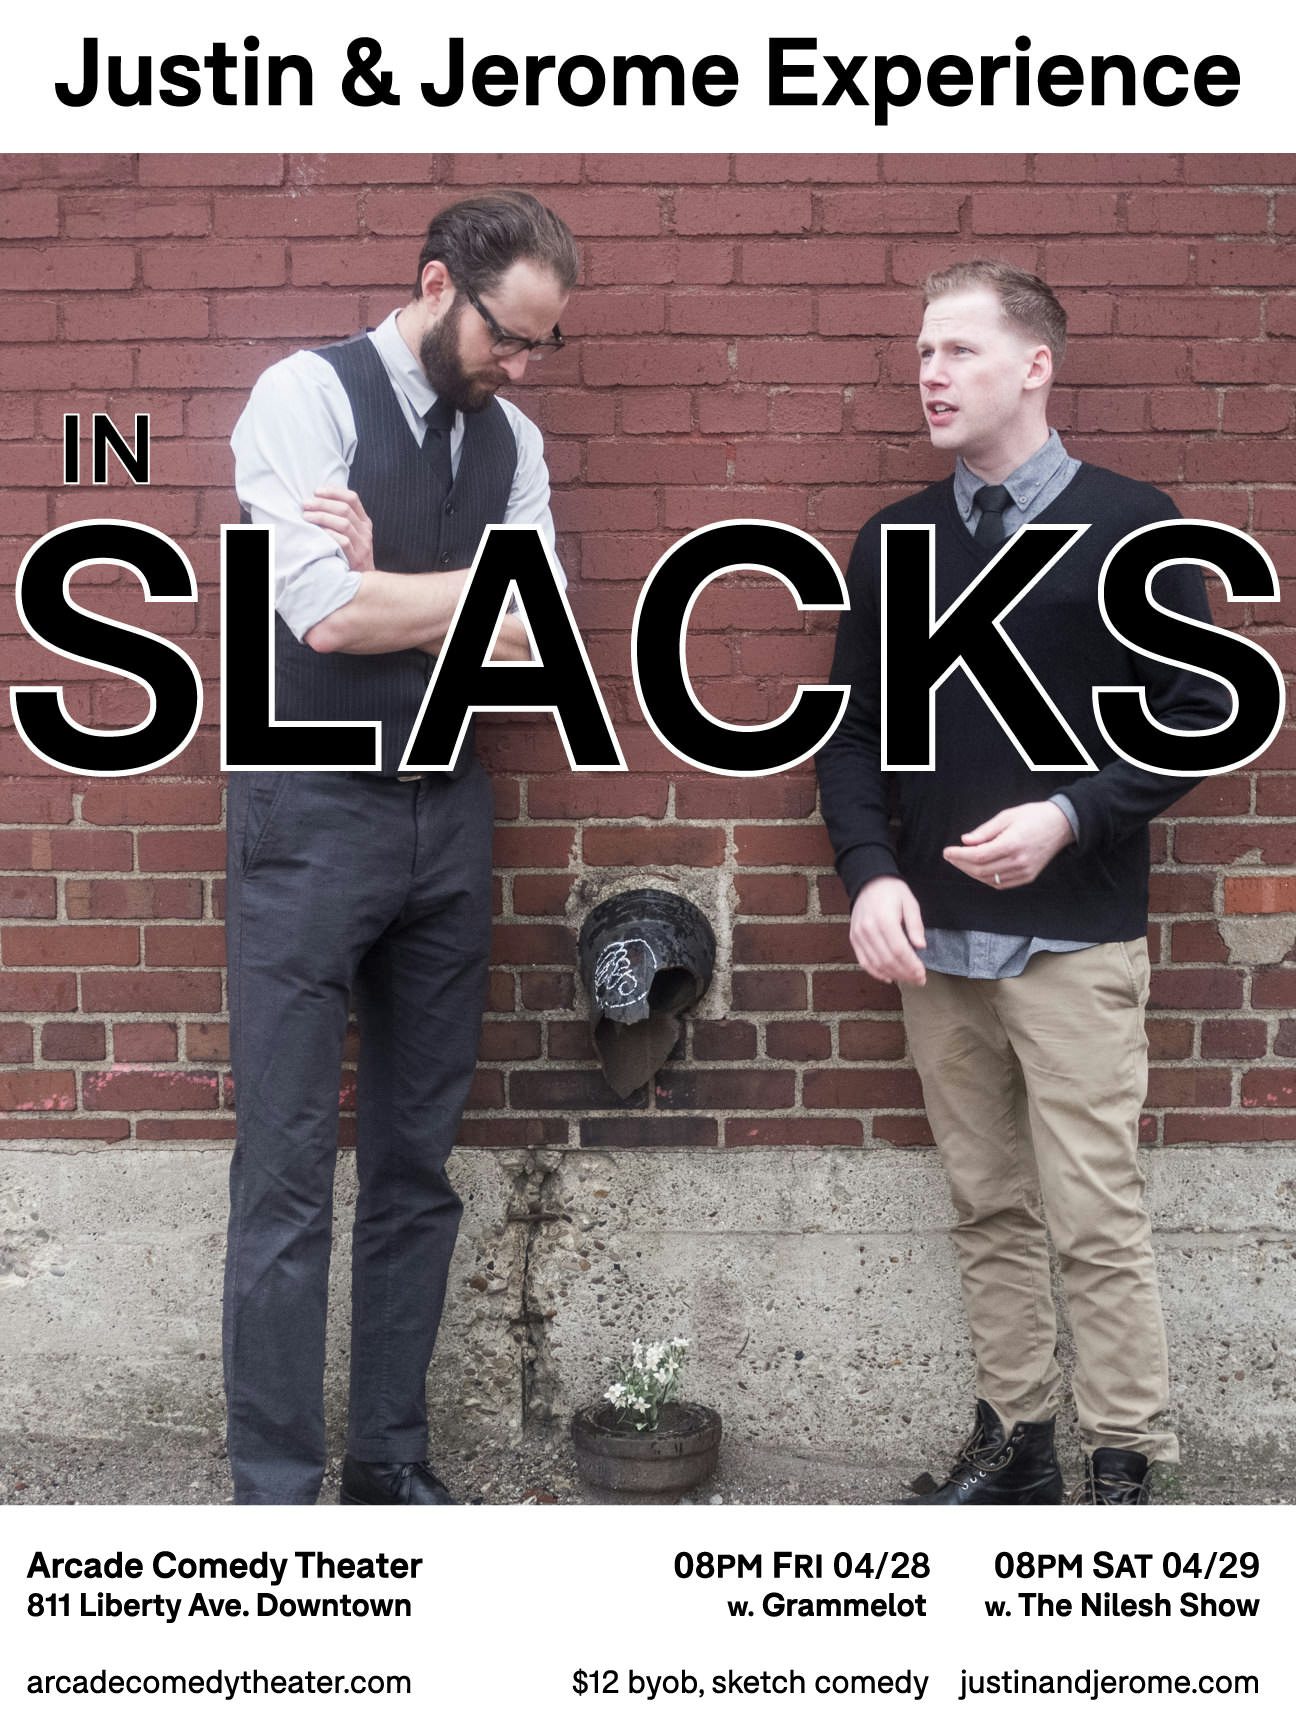 A show poster for JJE’s show “In Slacks.” Justin and Jerome stand in front of a brick wall looking dapper. Justin is on the left with a tie and vest on. Bespecatled he is looking down to the ground and what looks to be a flower growing out of a broken pipe. Jerome has a tie and sweater on, he is looking off into the distance.